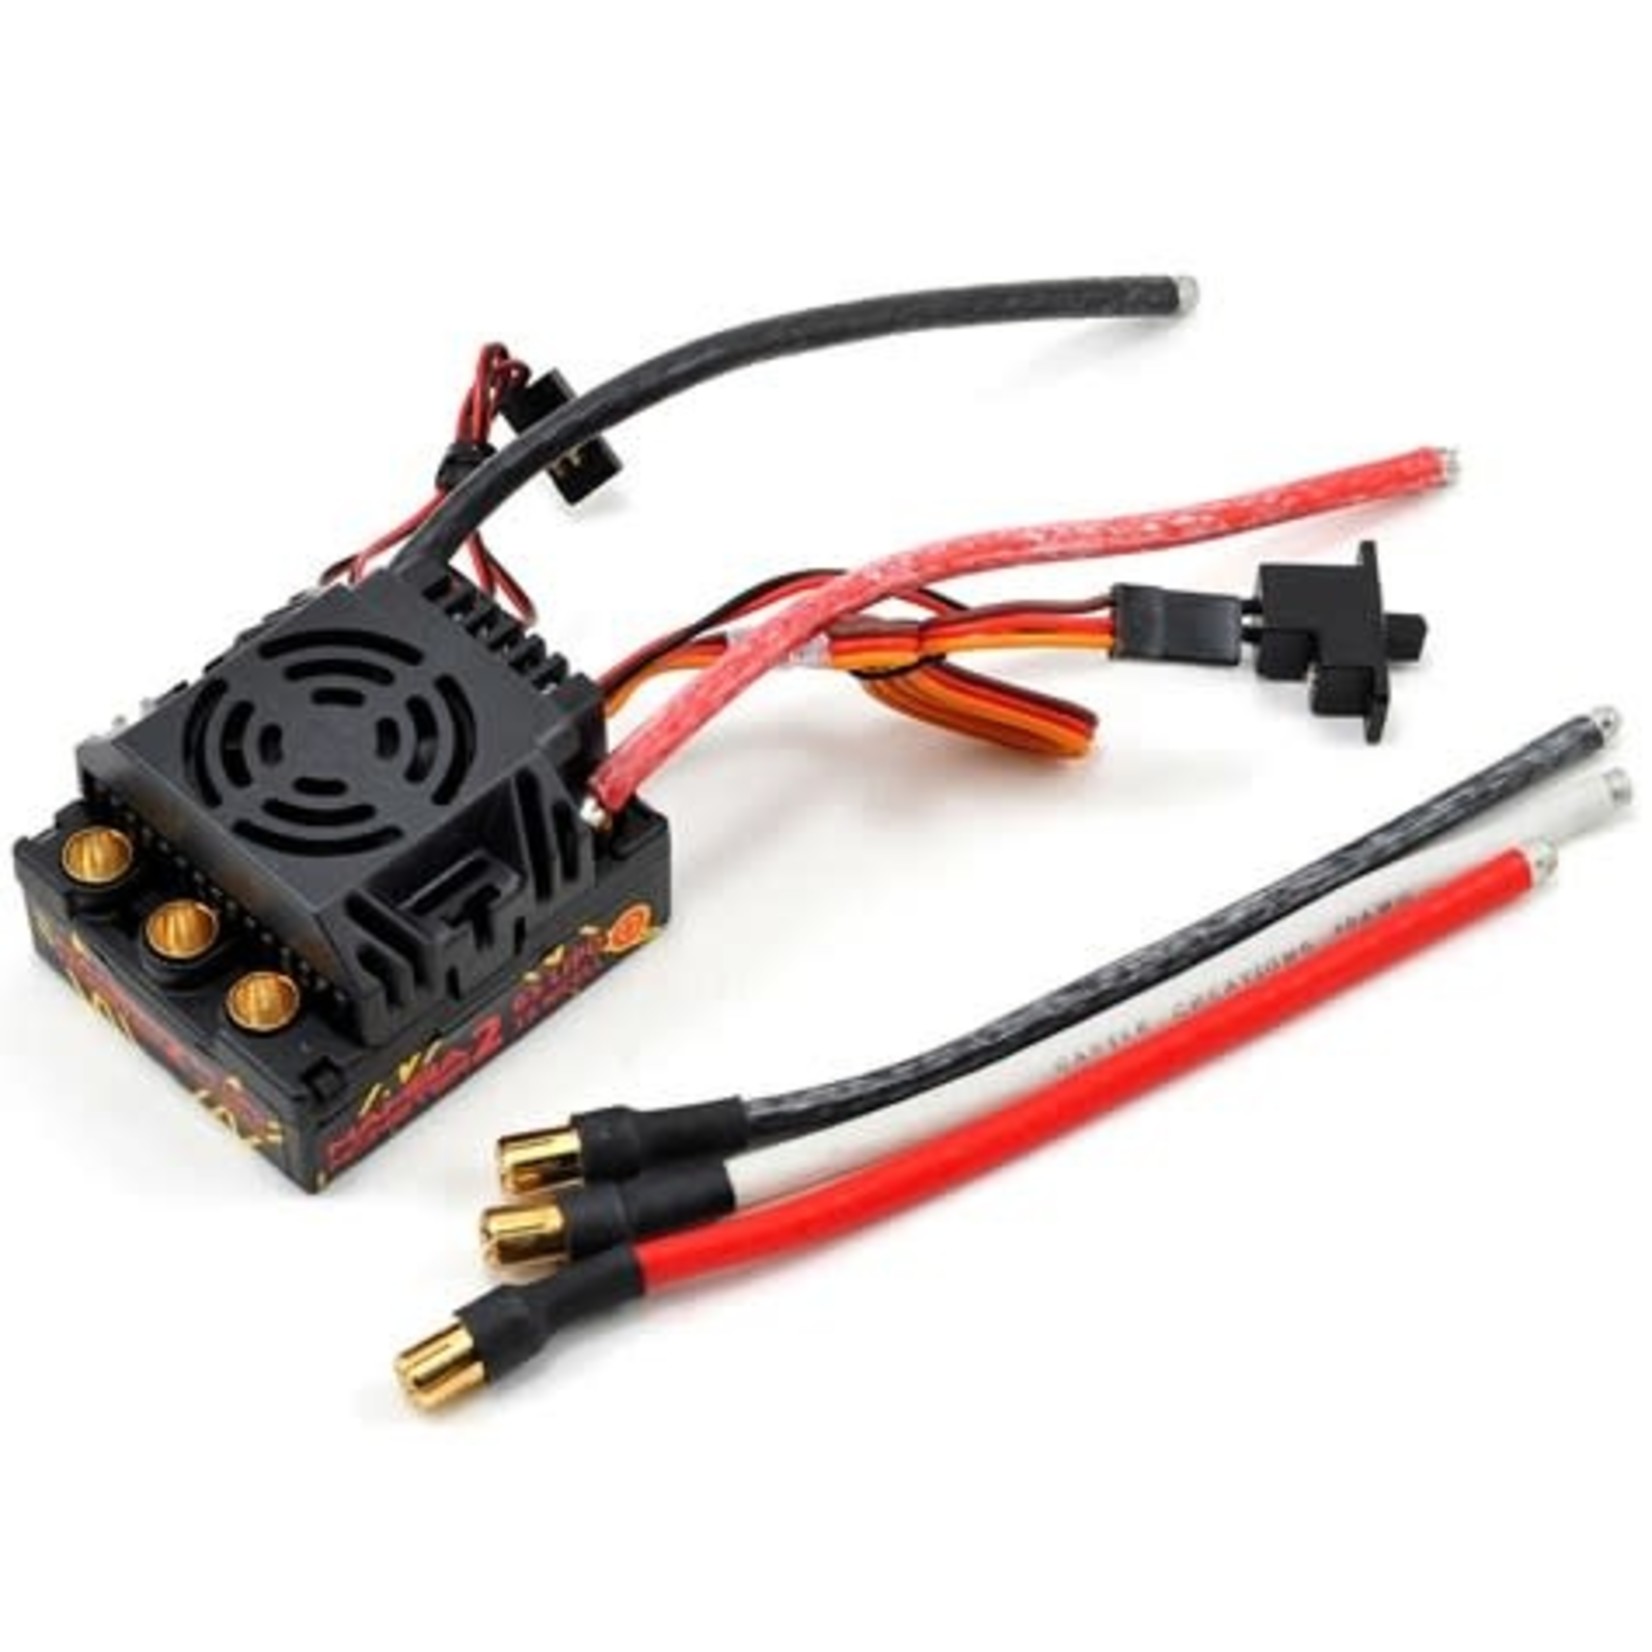 Castle Creations Castle Creations Mamba Monster 2 1/8th Scale Brushless ESC #010-0108-00